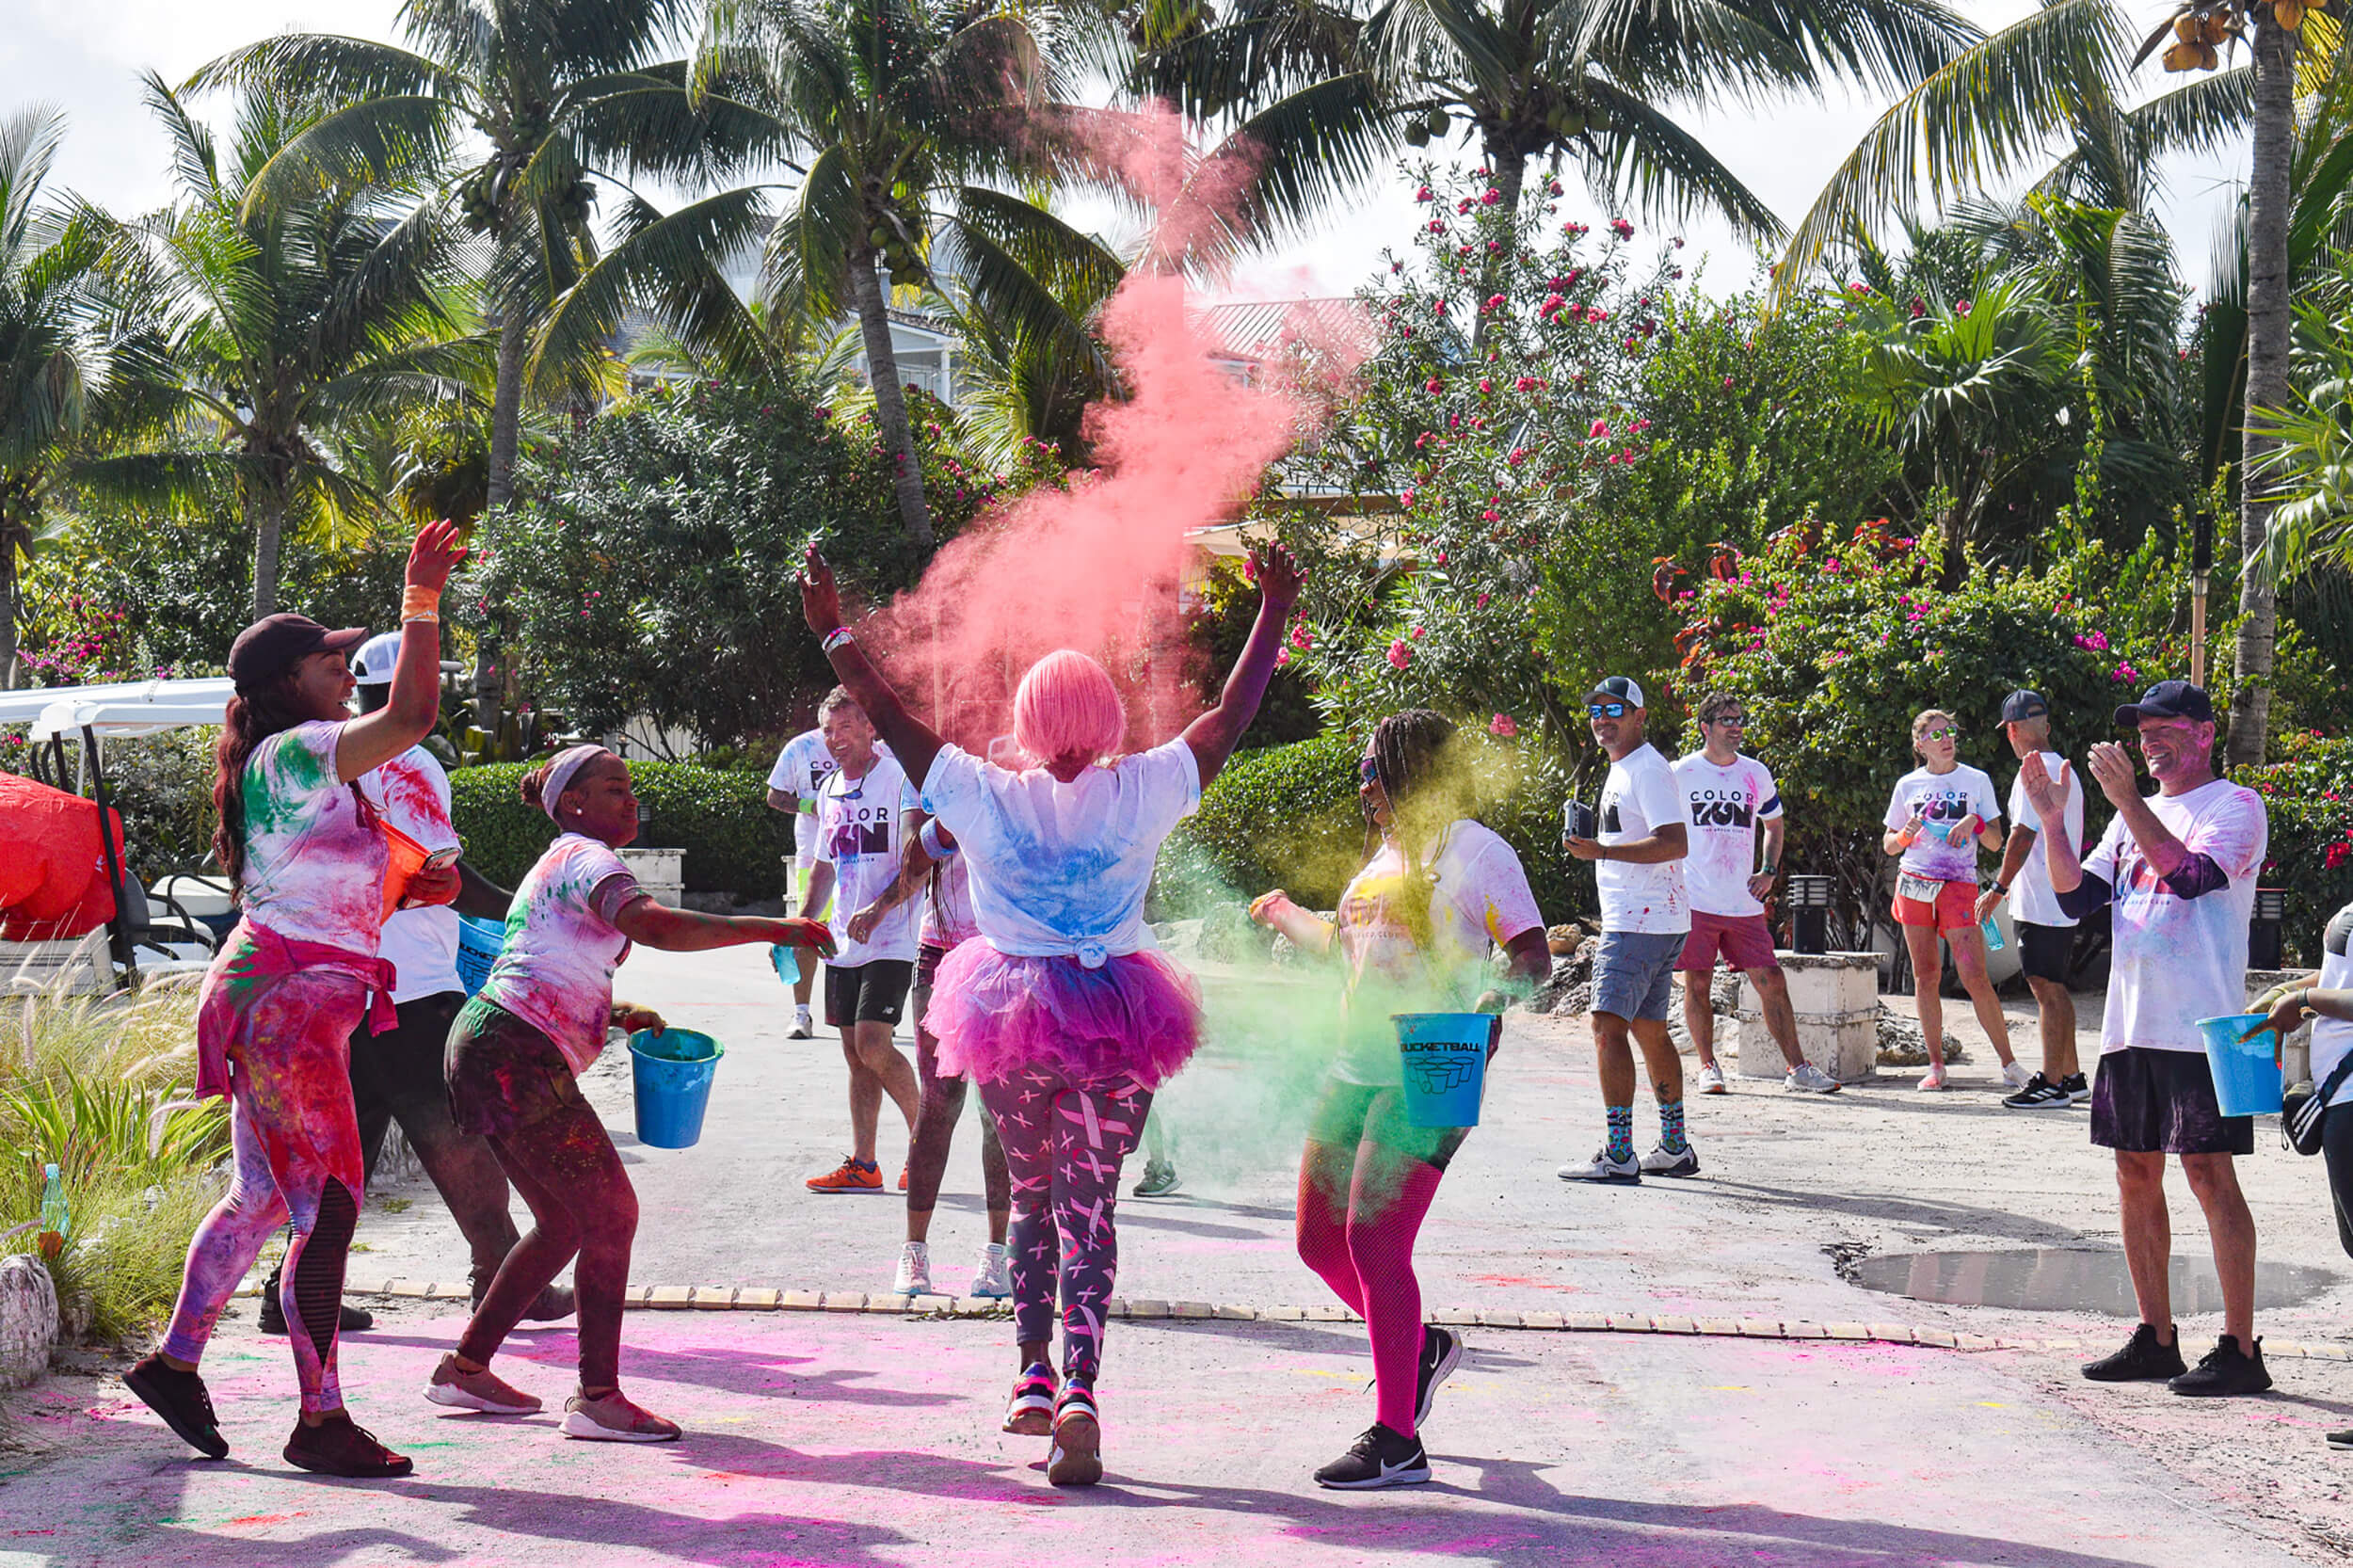 People enjoying a color run event at The Abaco Club